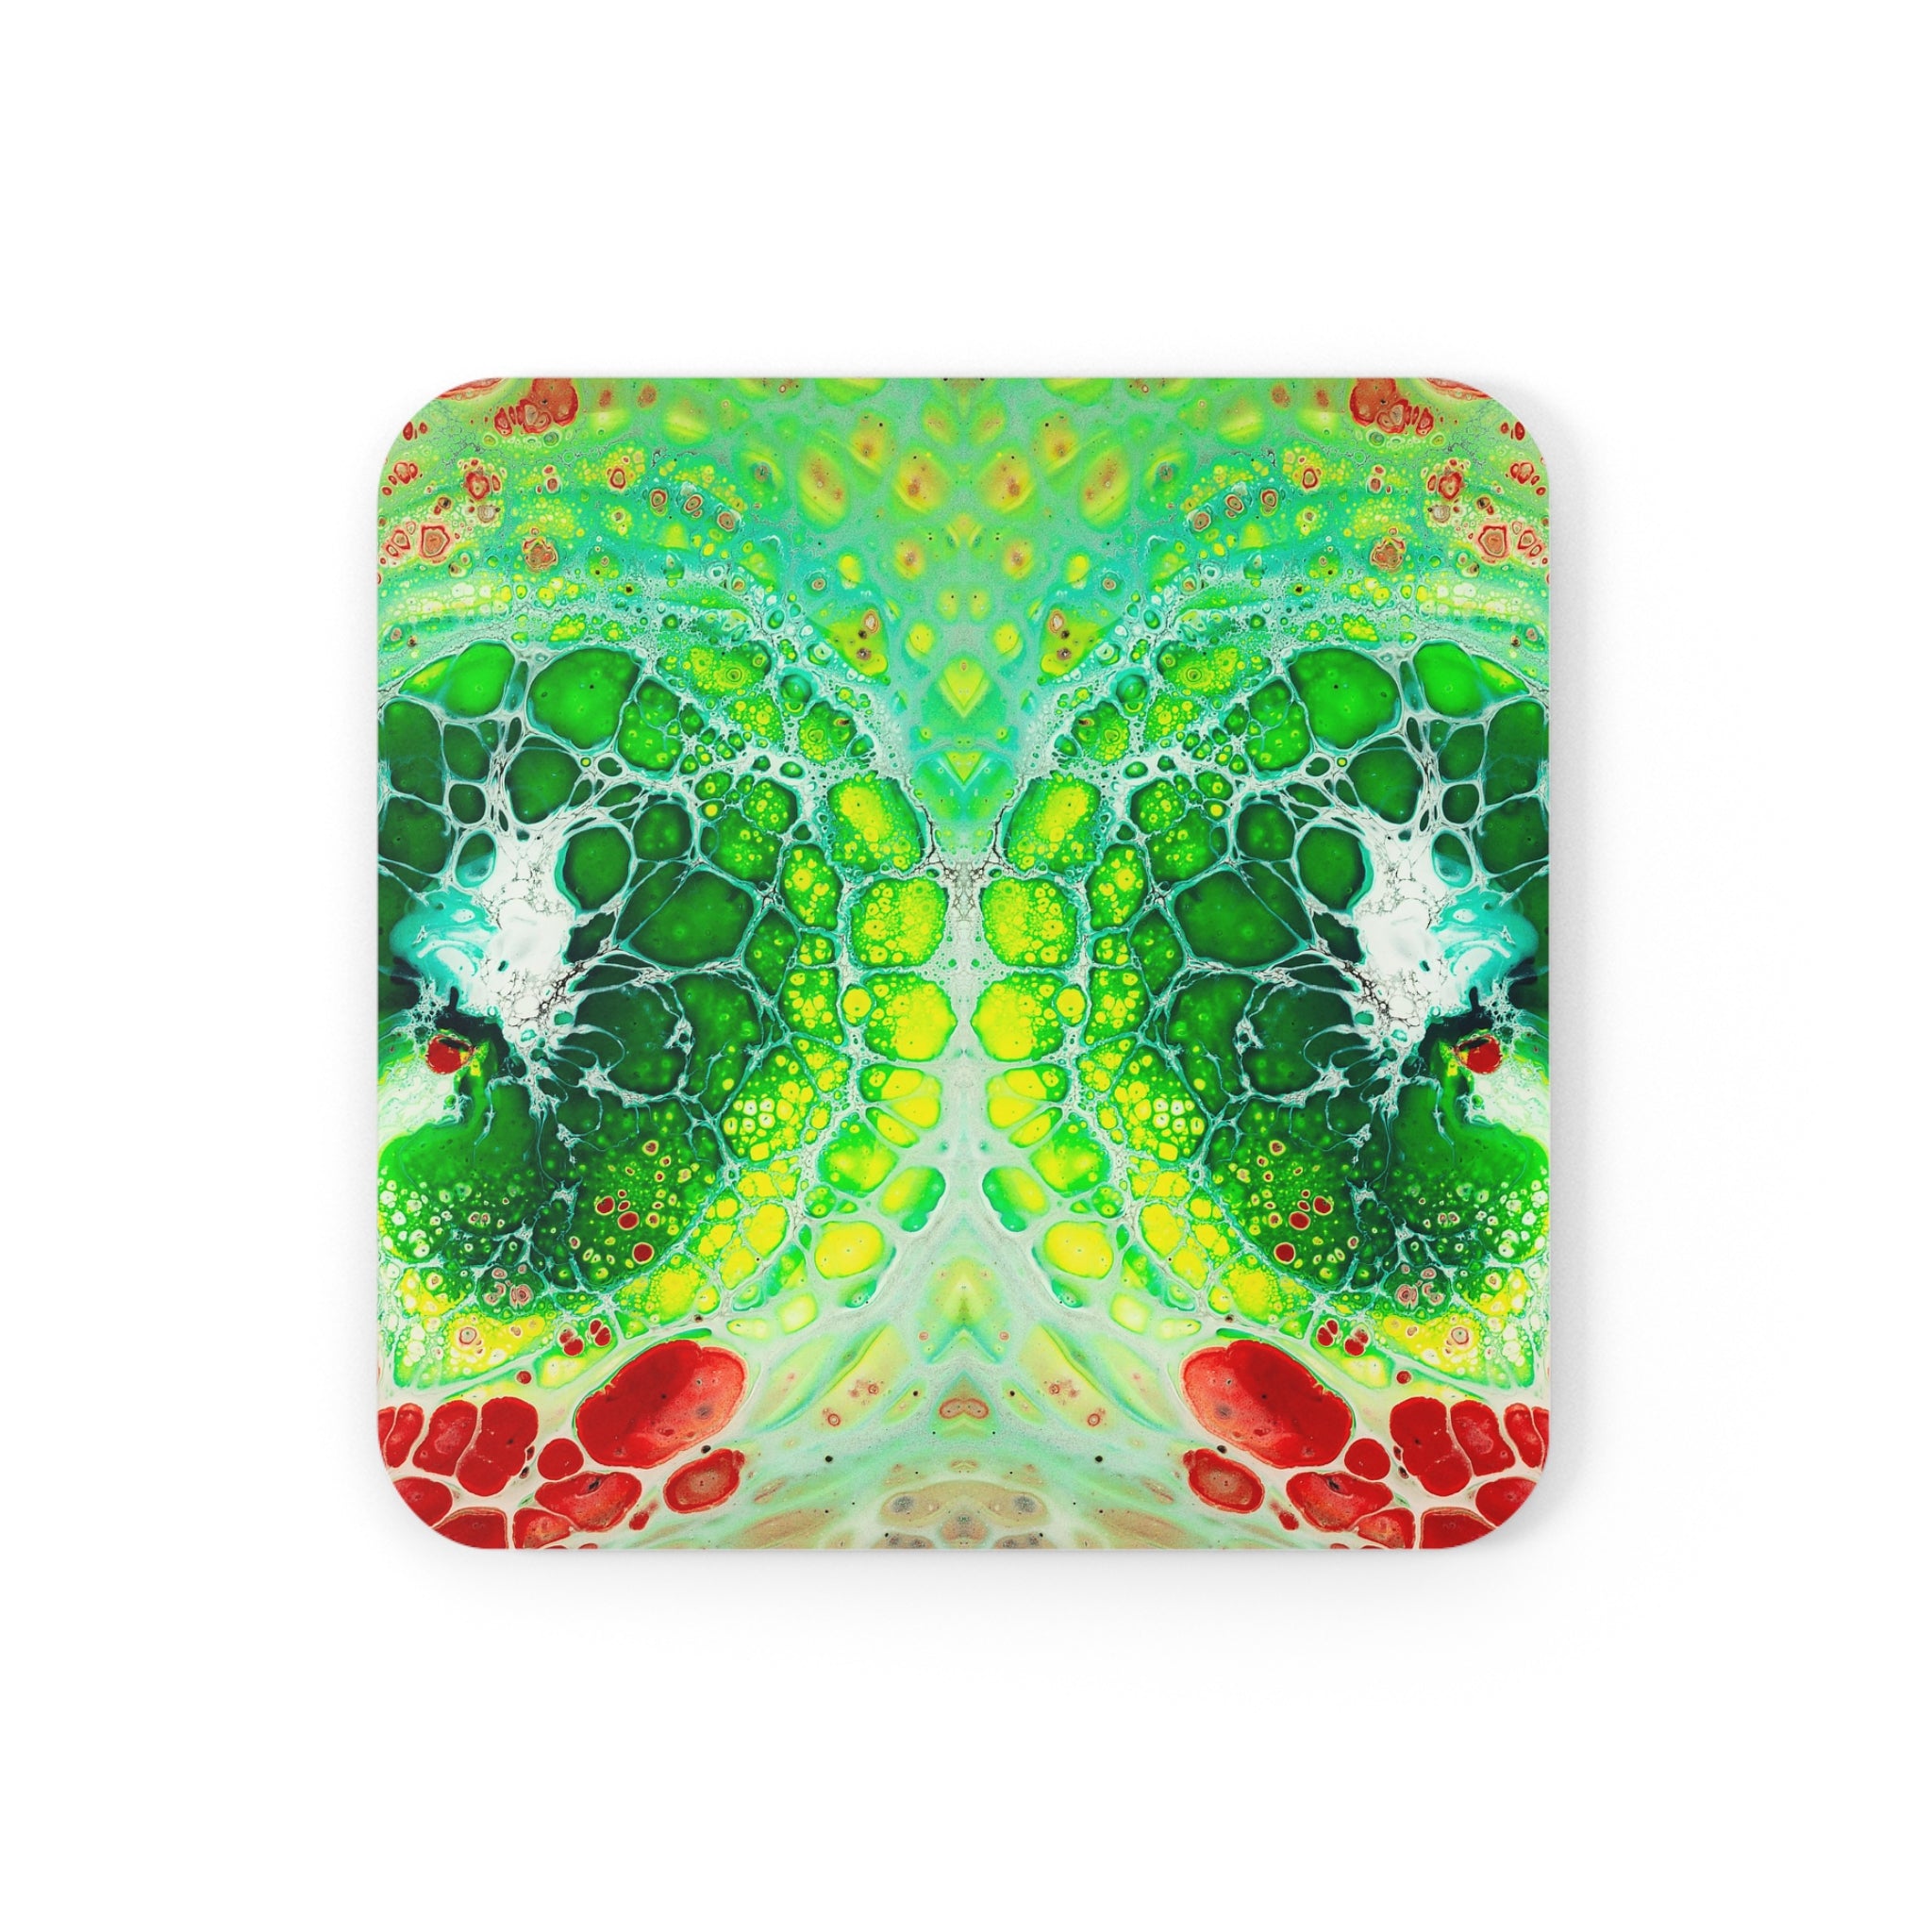 Cameron Creations - Up Close - Stylish Coffee Coaster - Square Front